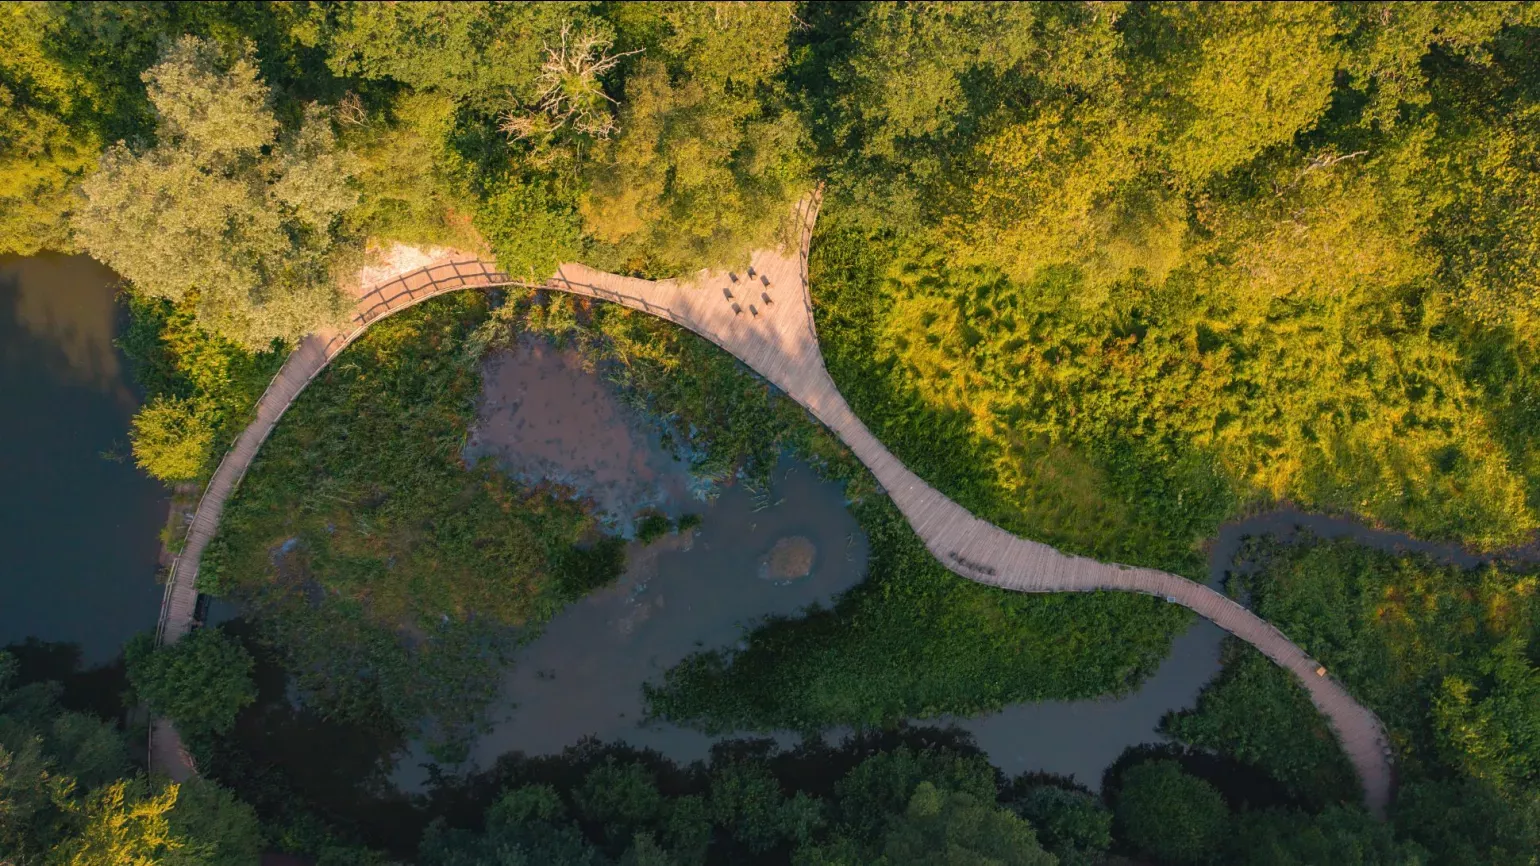 A birds eye view of a wetlands landscape with a wooden walkway